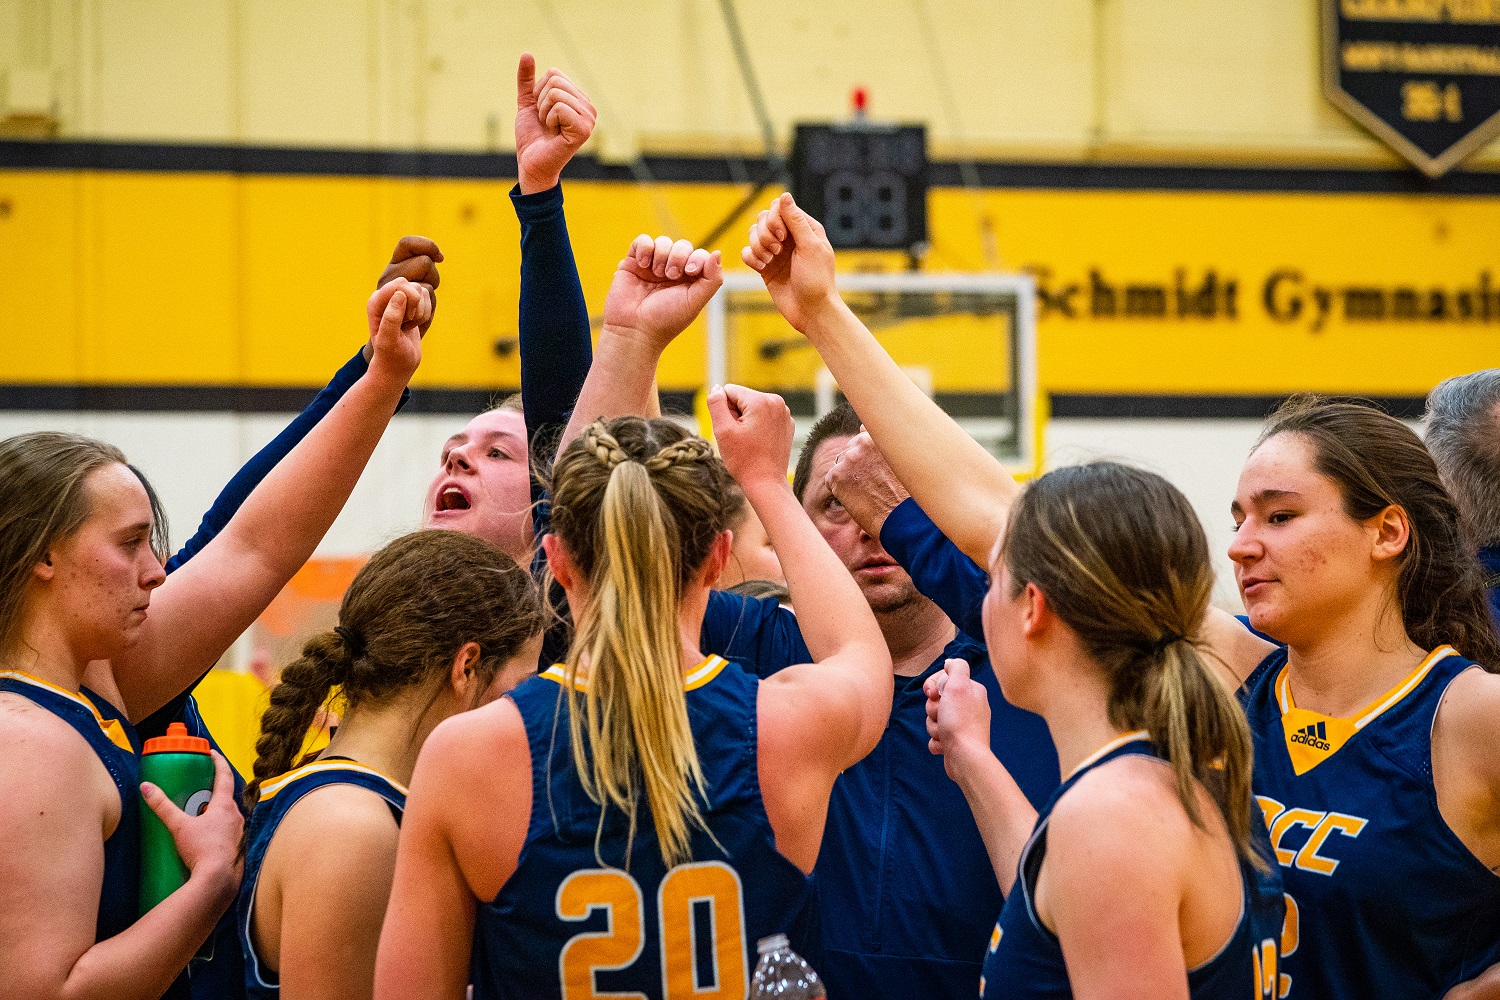 grcc-women-s-basketball-team-loses-to-muskegon-community-college-in